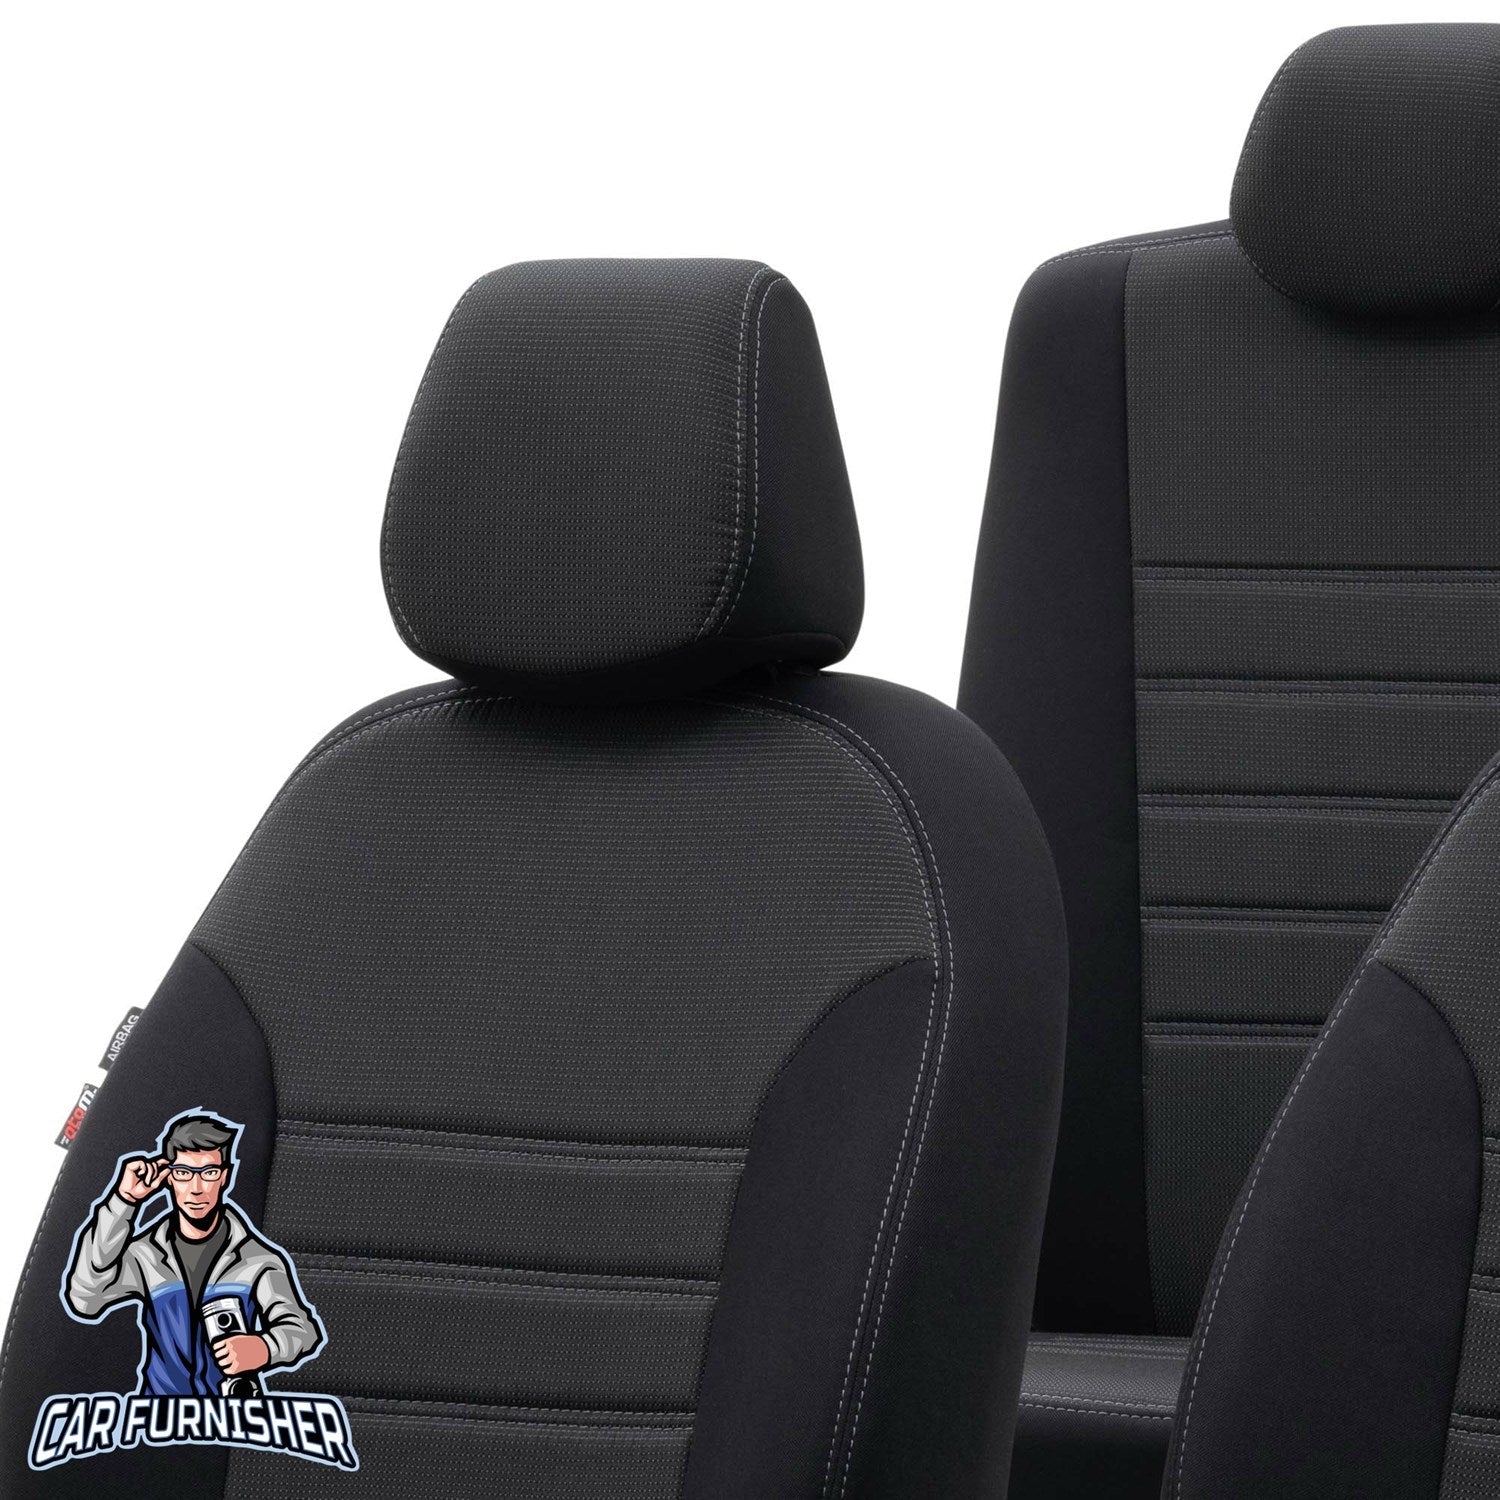 Mercedes benz seat covers -  France